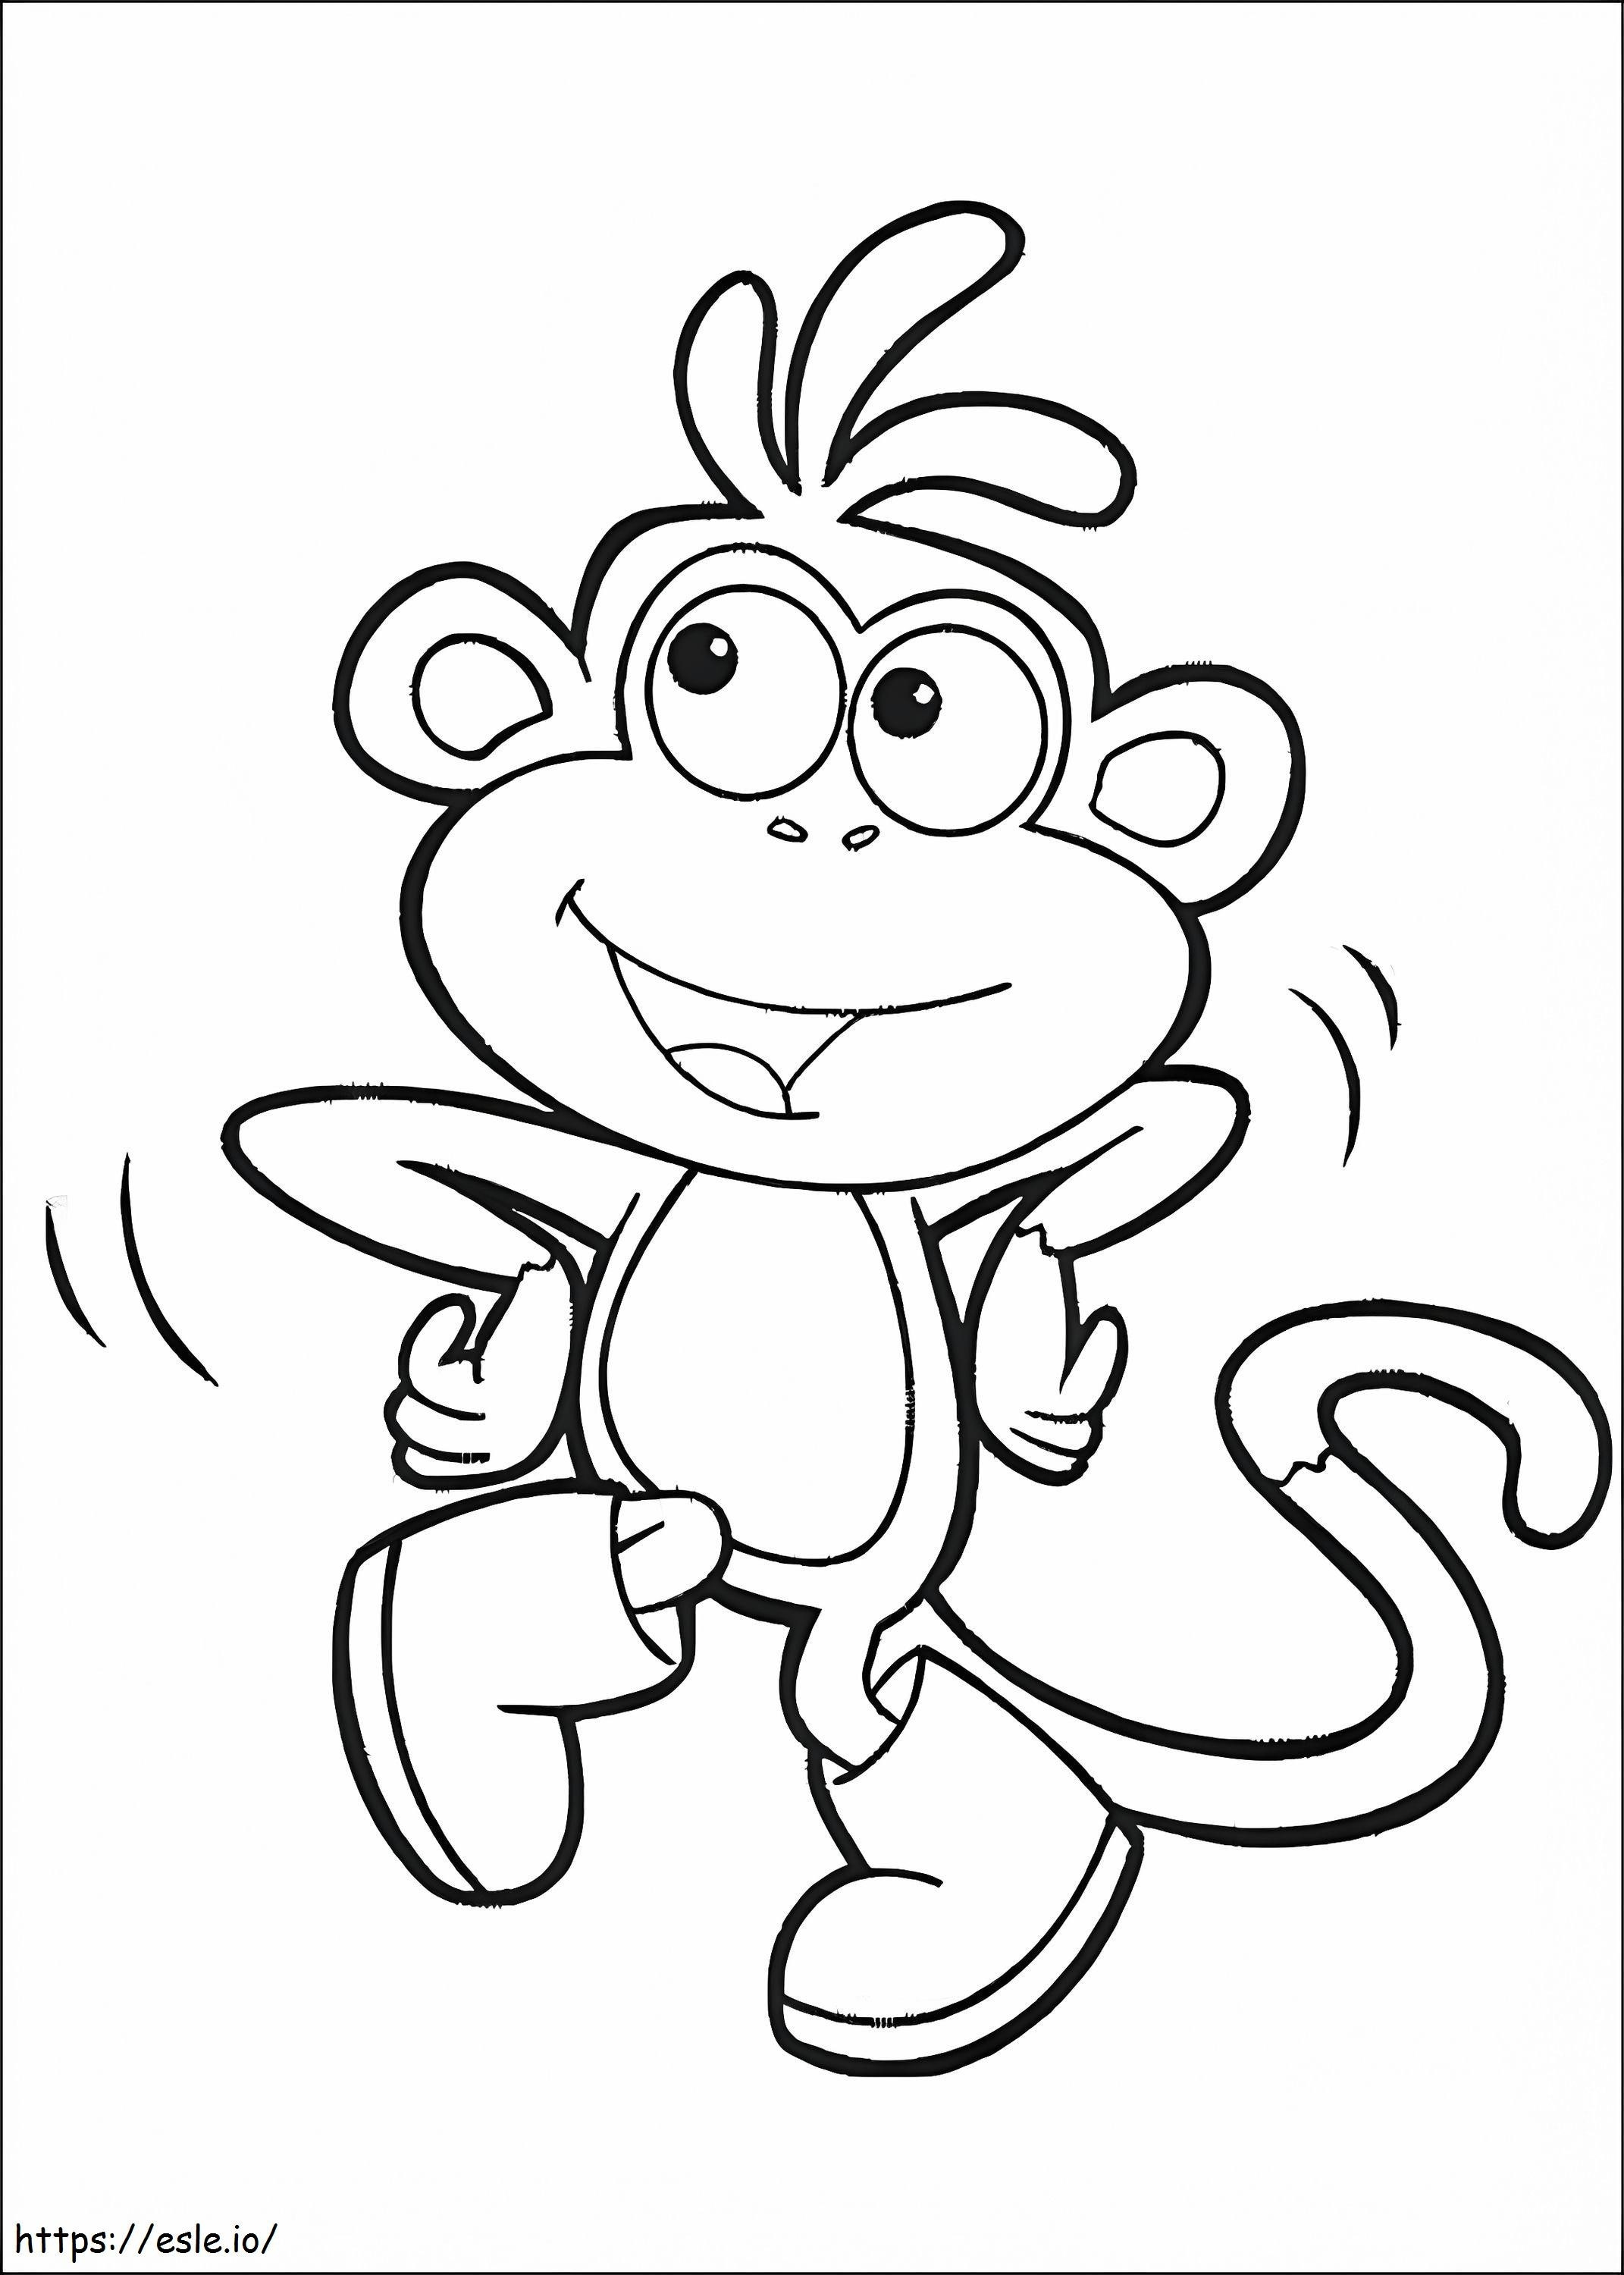 Monkey Boots Dancing coloring page